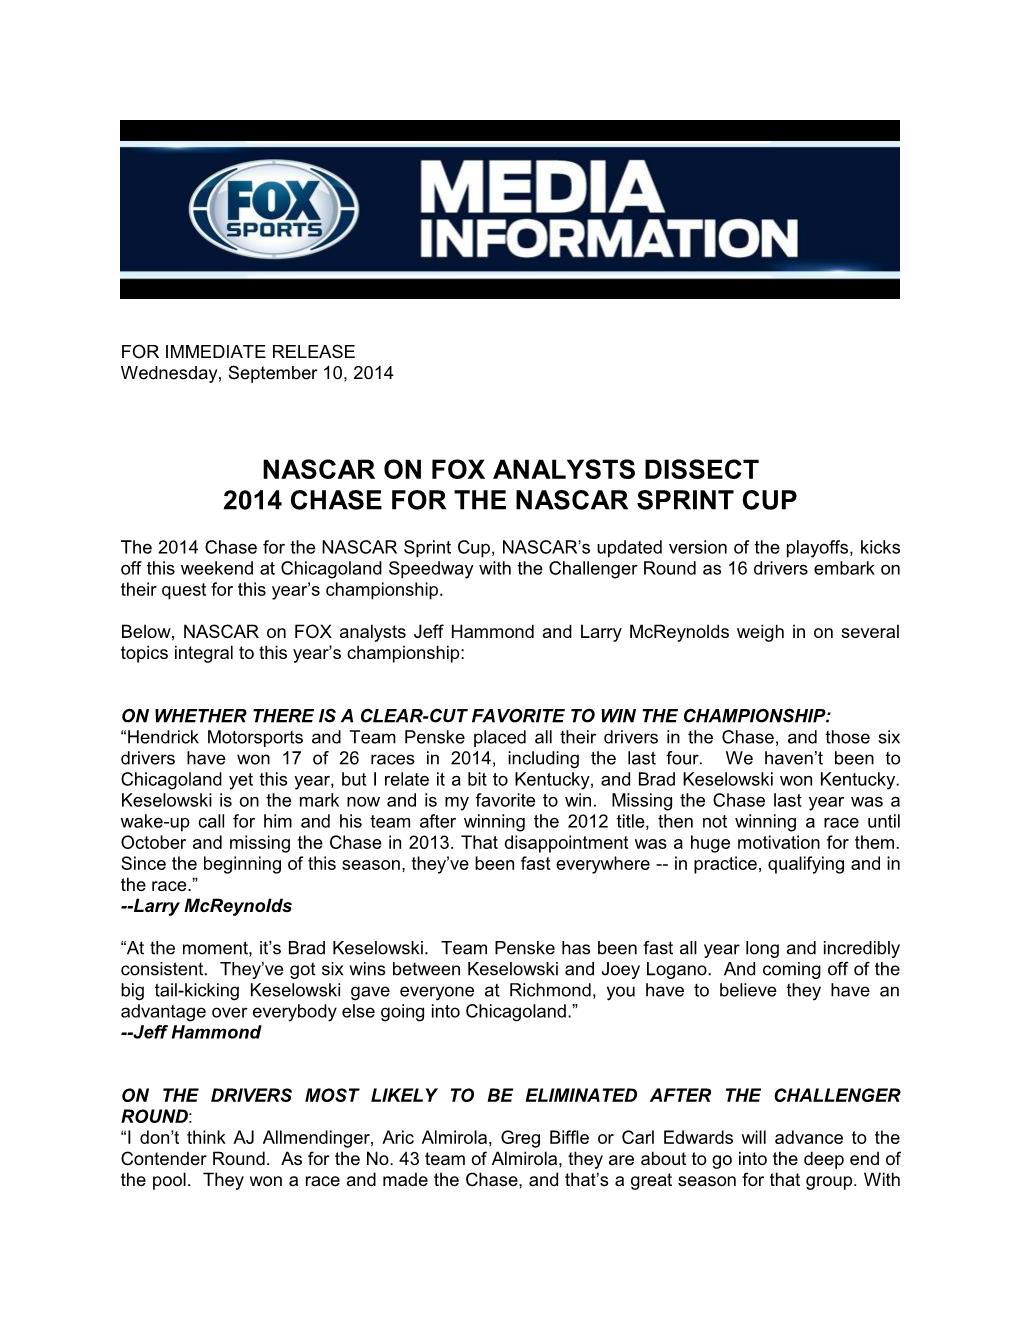 Nascar on Fox Analysts Dissect 2014 Chase for the Nascar Sprint Cup